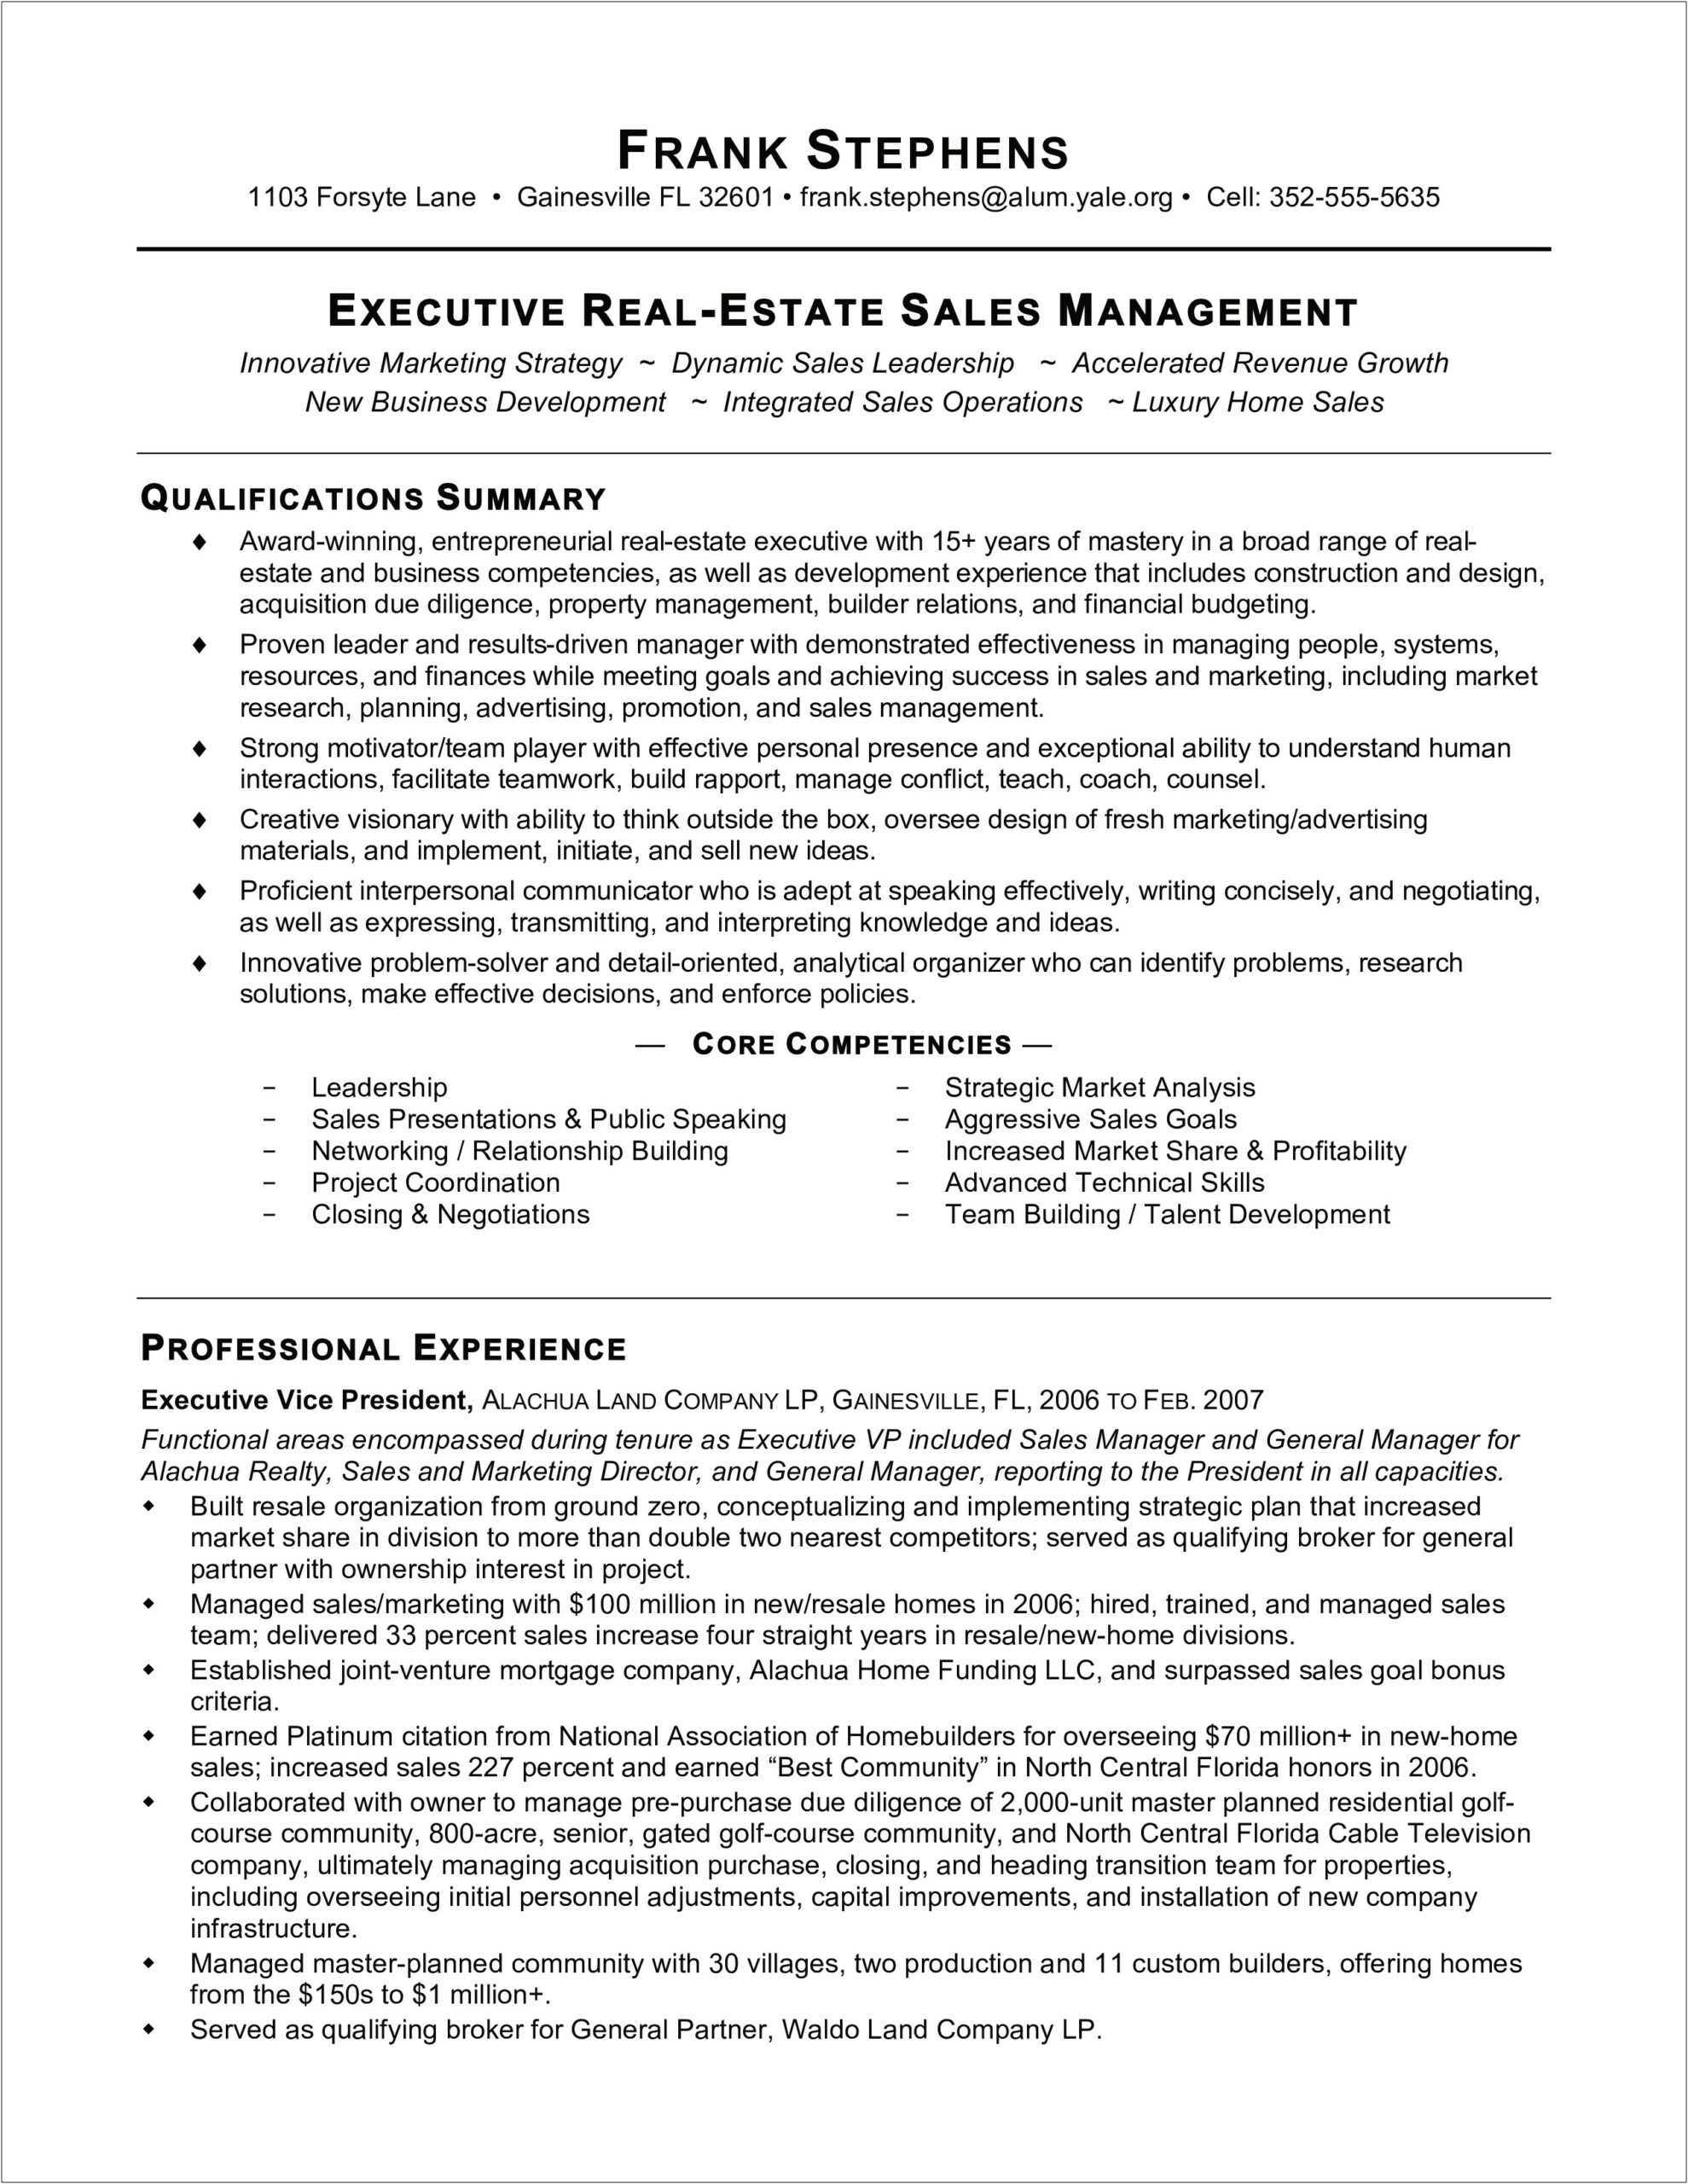 Cell Phone Sales Manager Resume